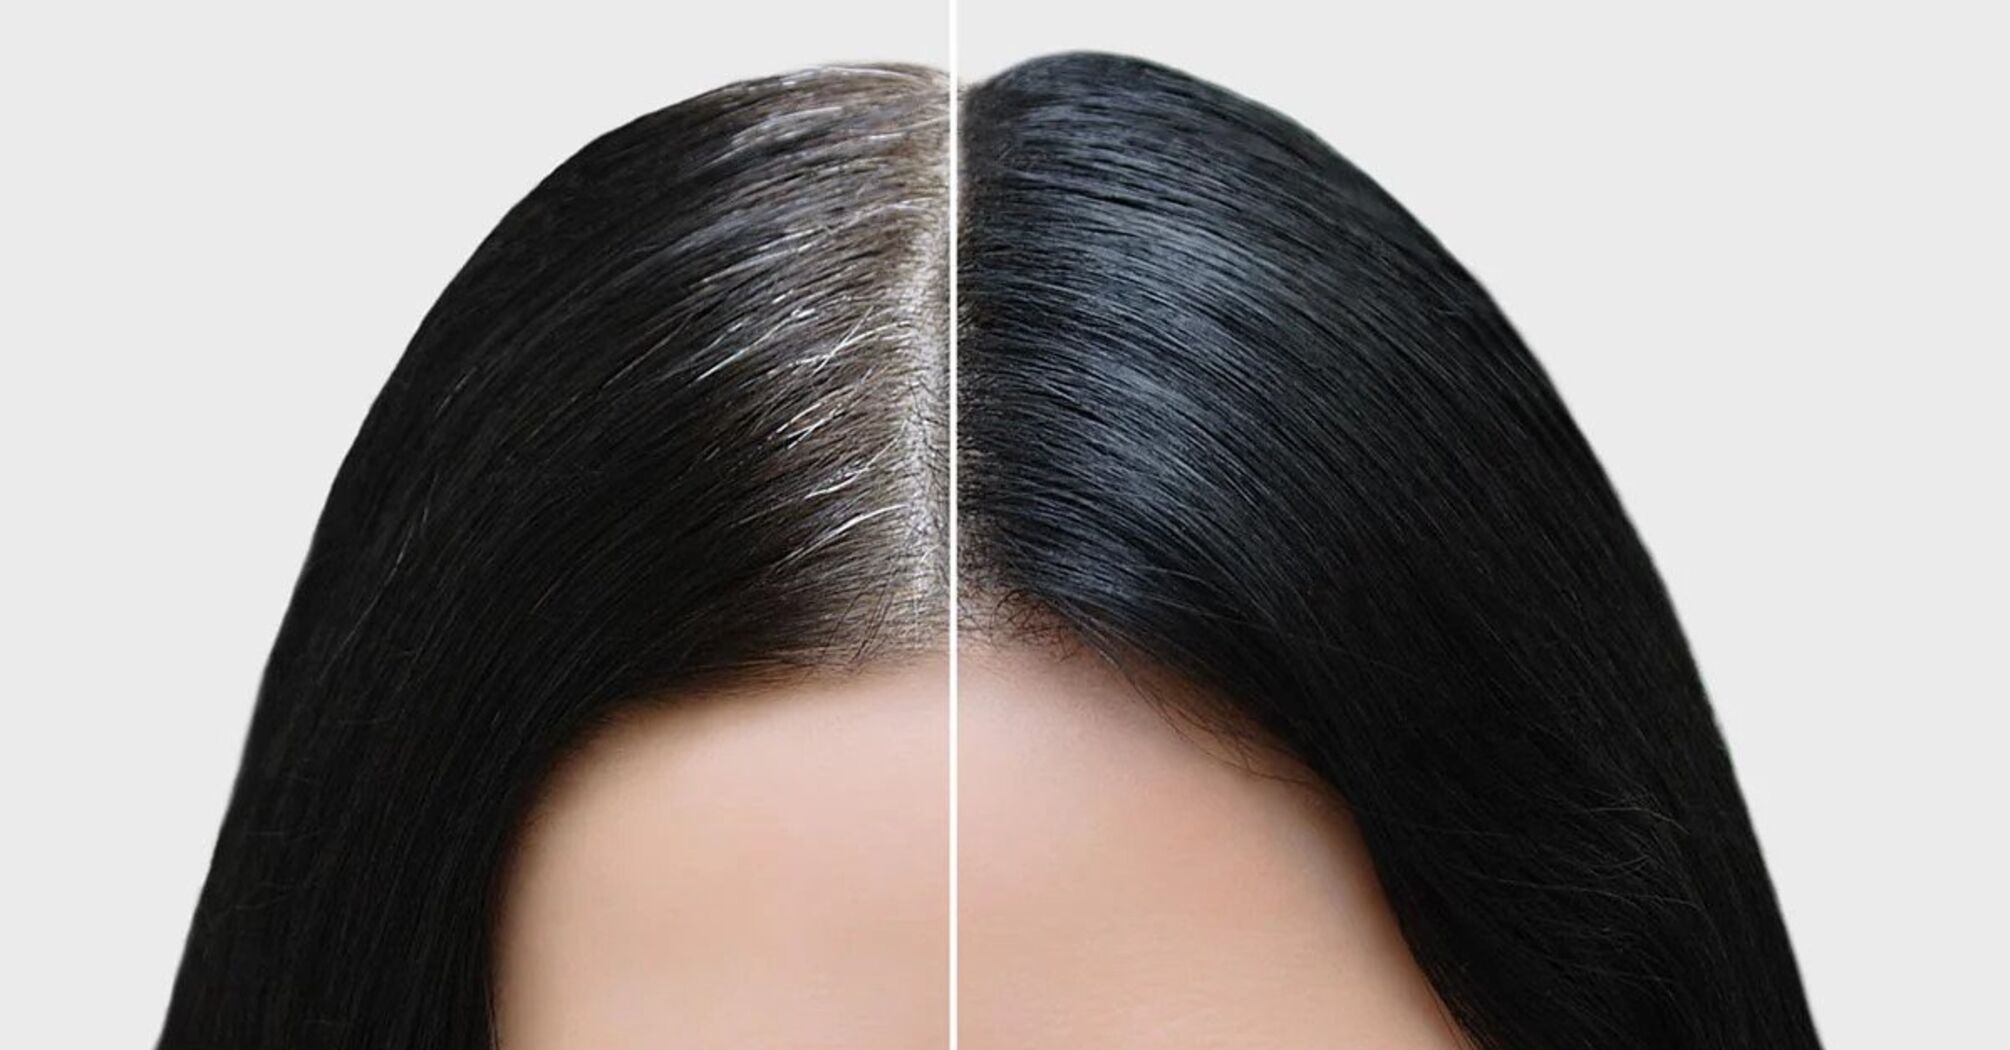 How to protect your hair from premature graying